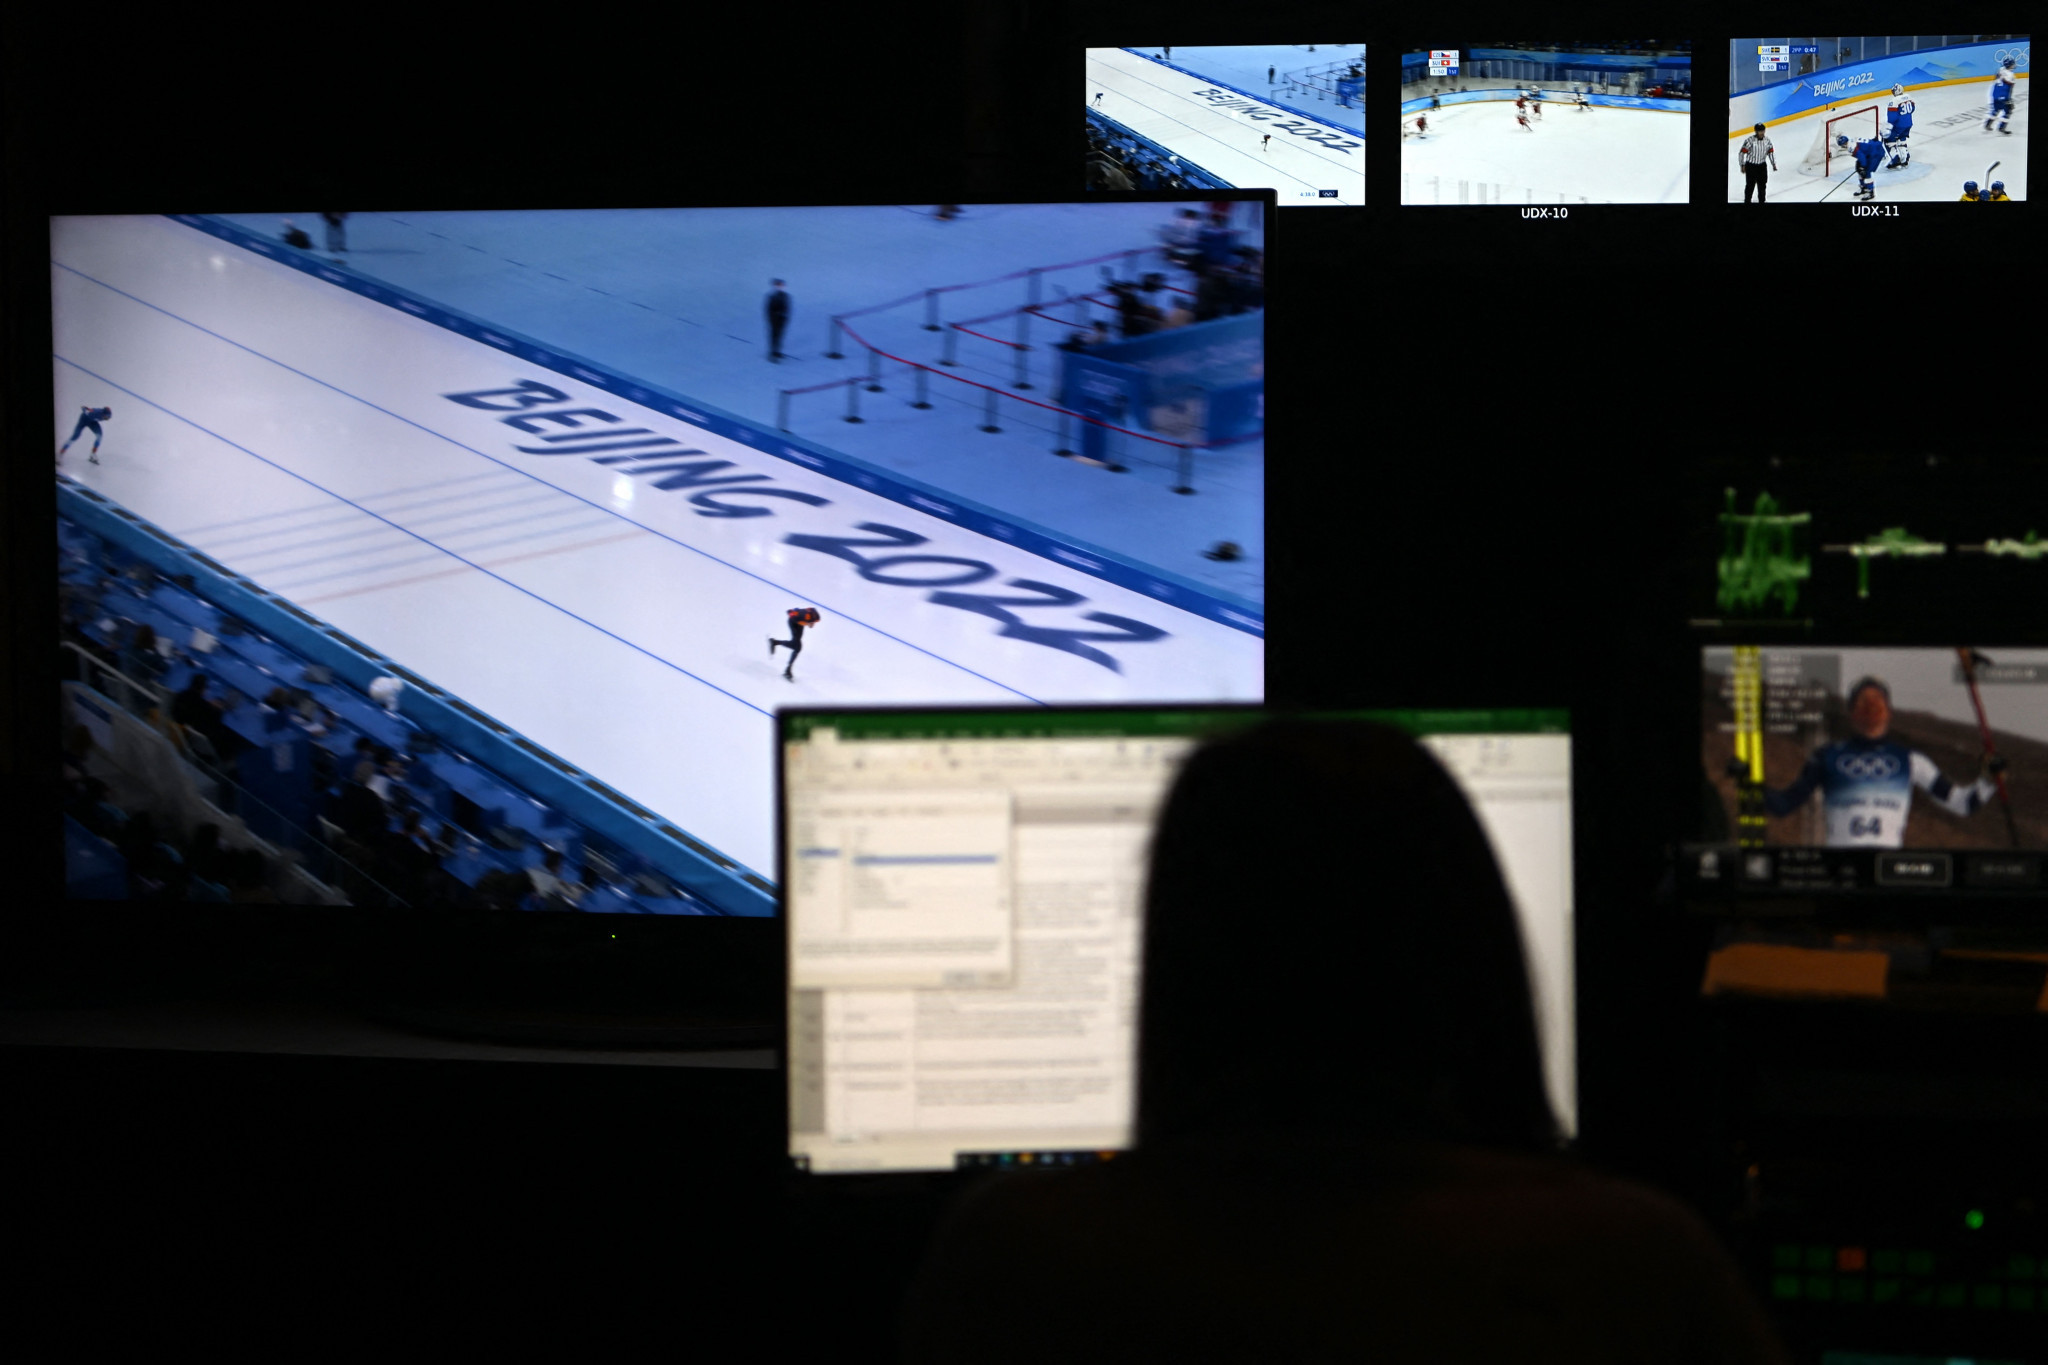 Russian broadcaster Match TV claimed it is "in contact" with the IOC on broadcasting rights for the Olympic Games from 2026 ©Getty Images